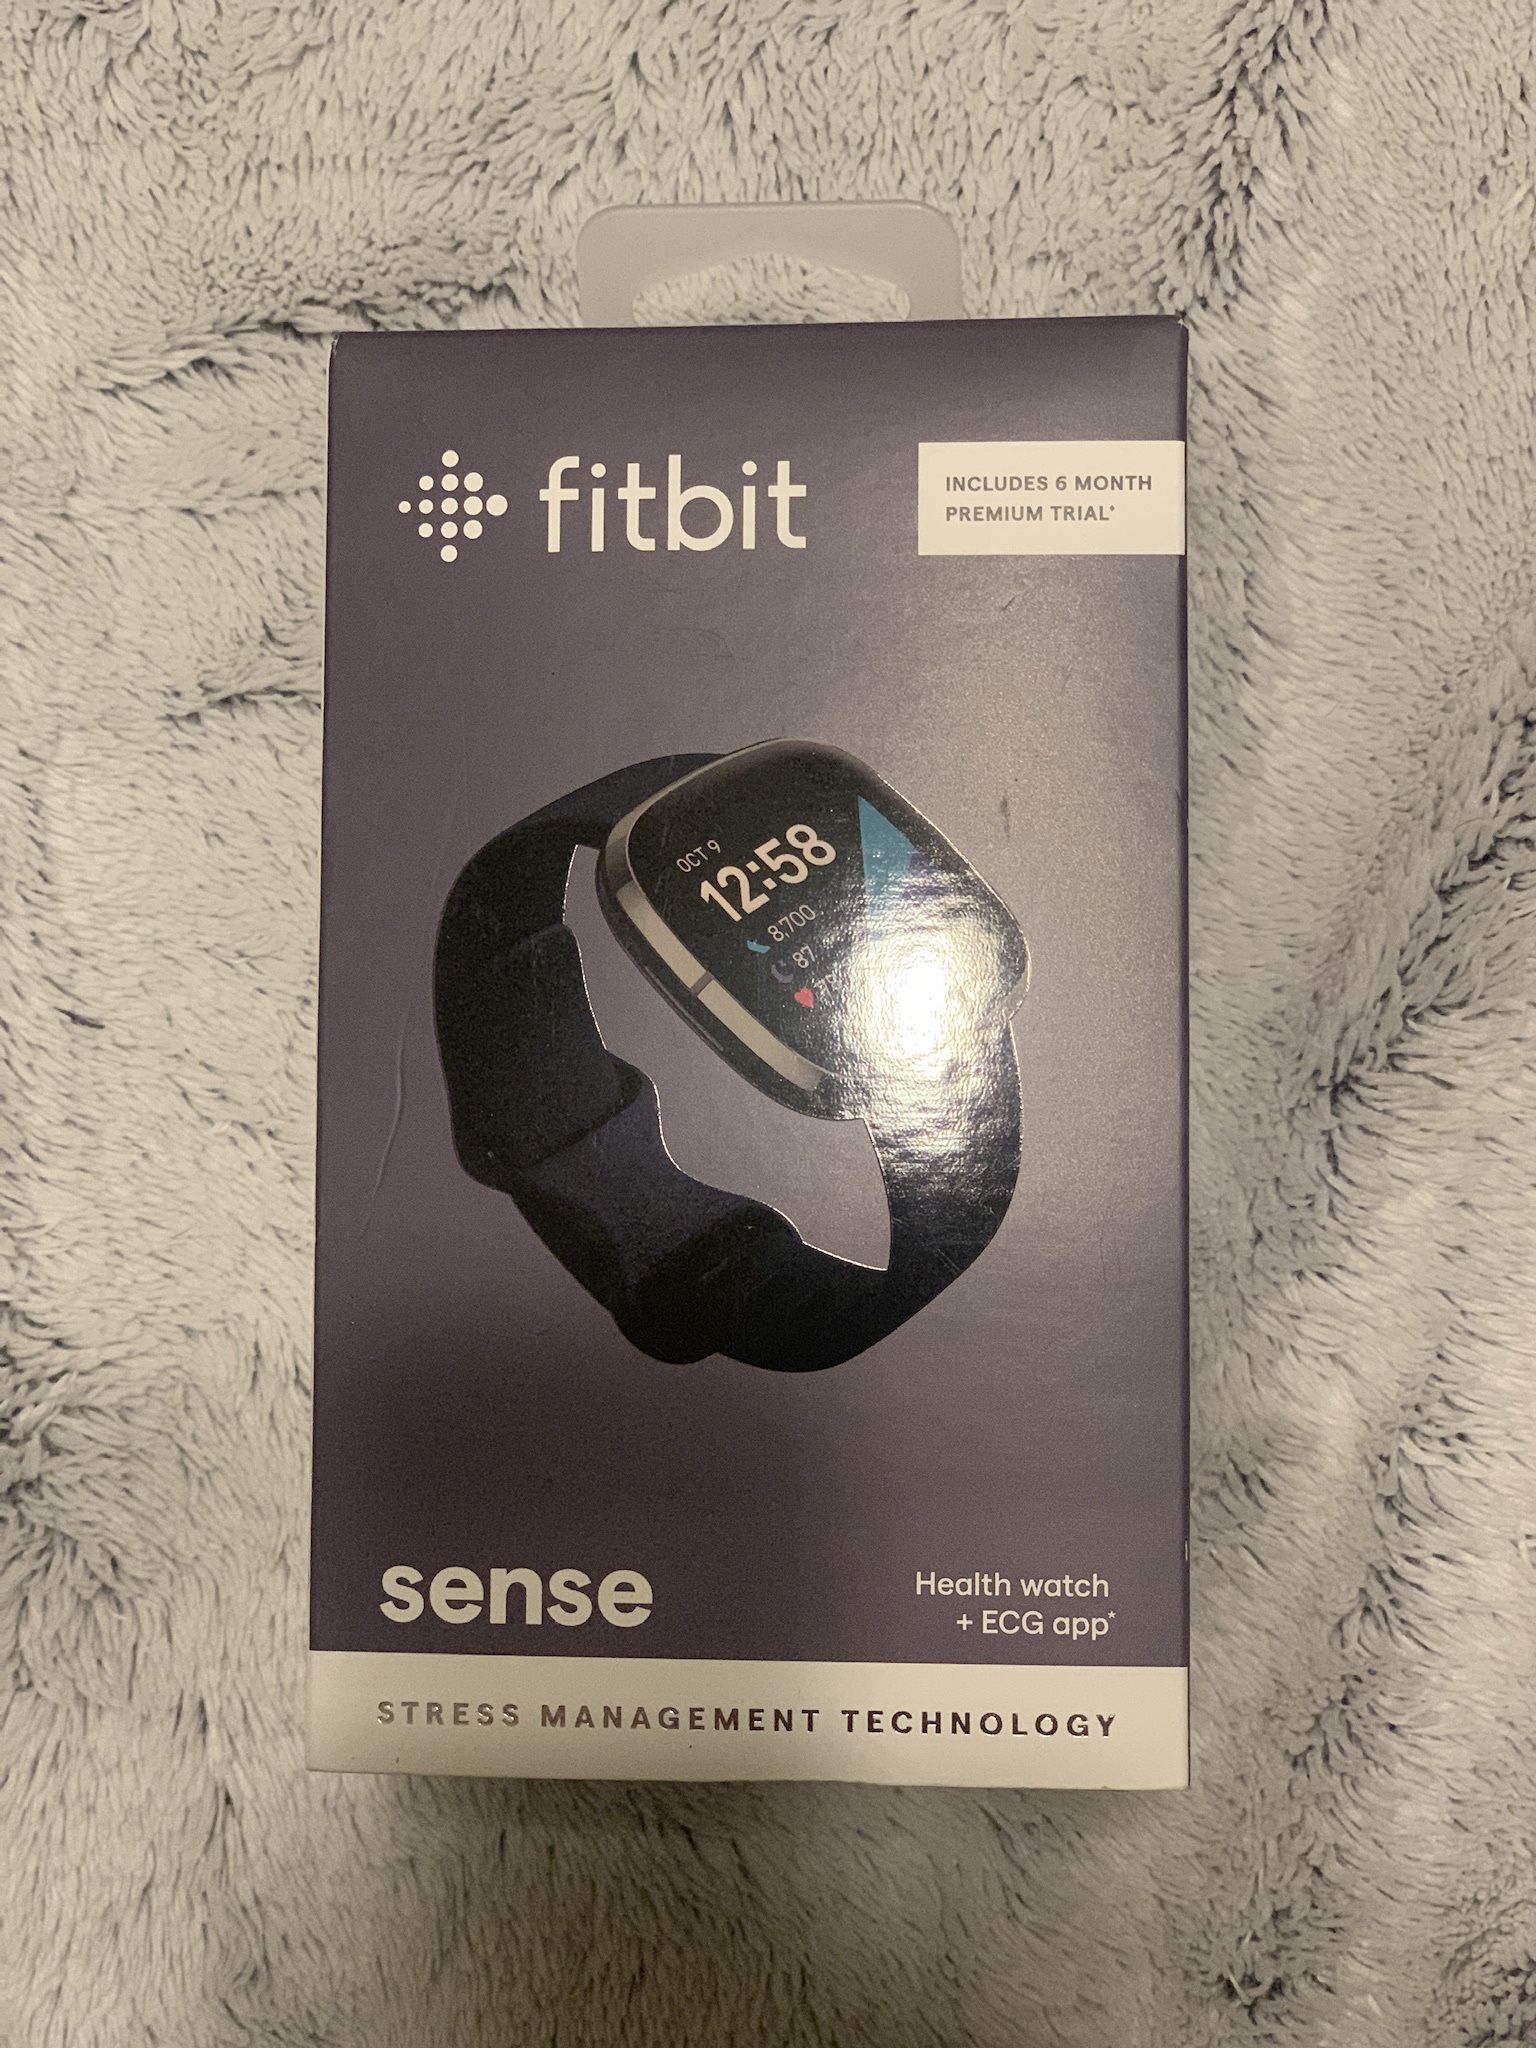 NEW SEALED FITBIT SENSE SMARTWATCH BLACK WITH (6) MONTH FREE TRIAL SEALED BOX 